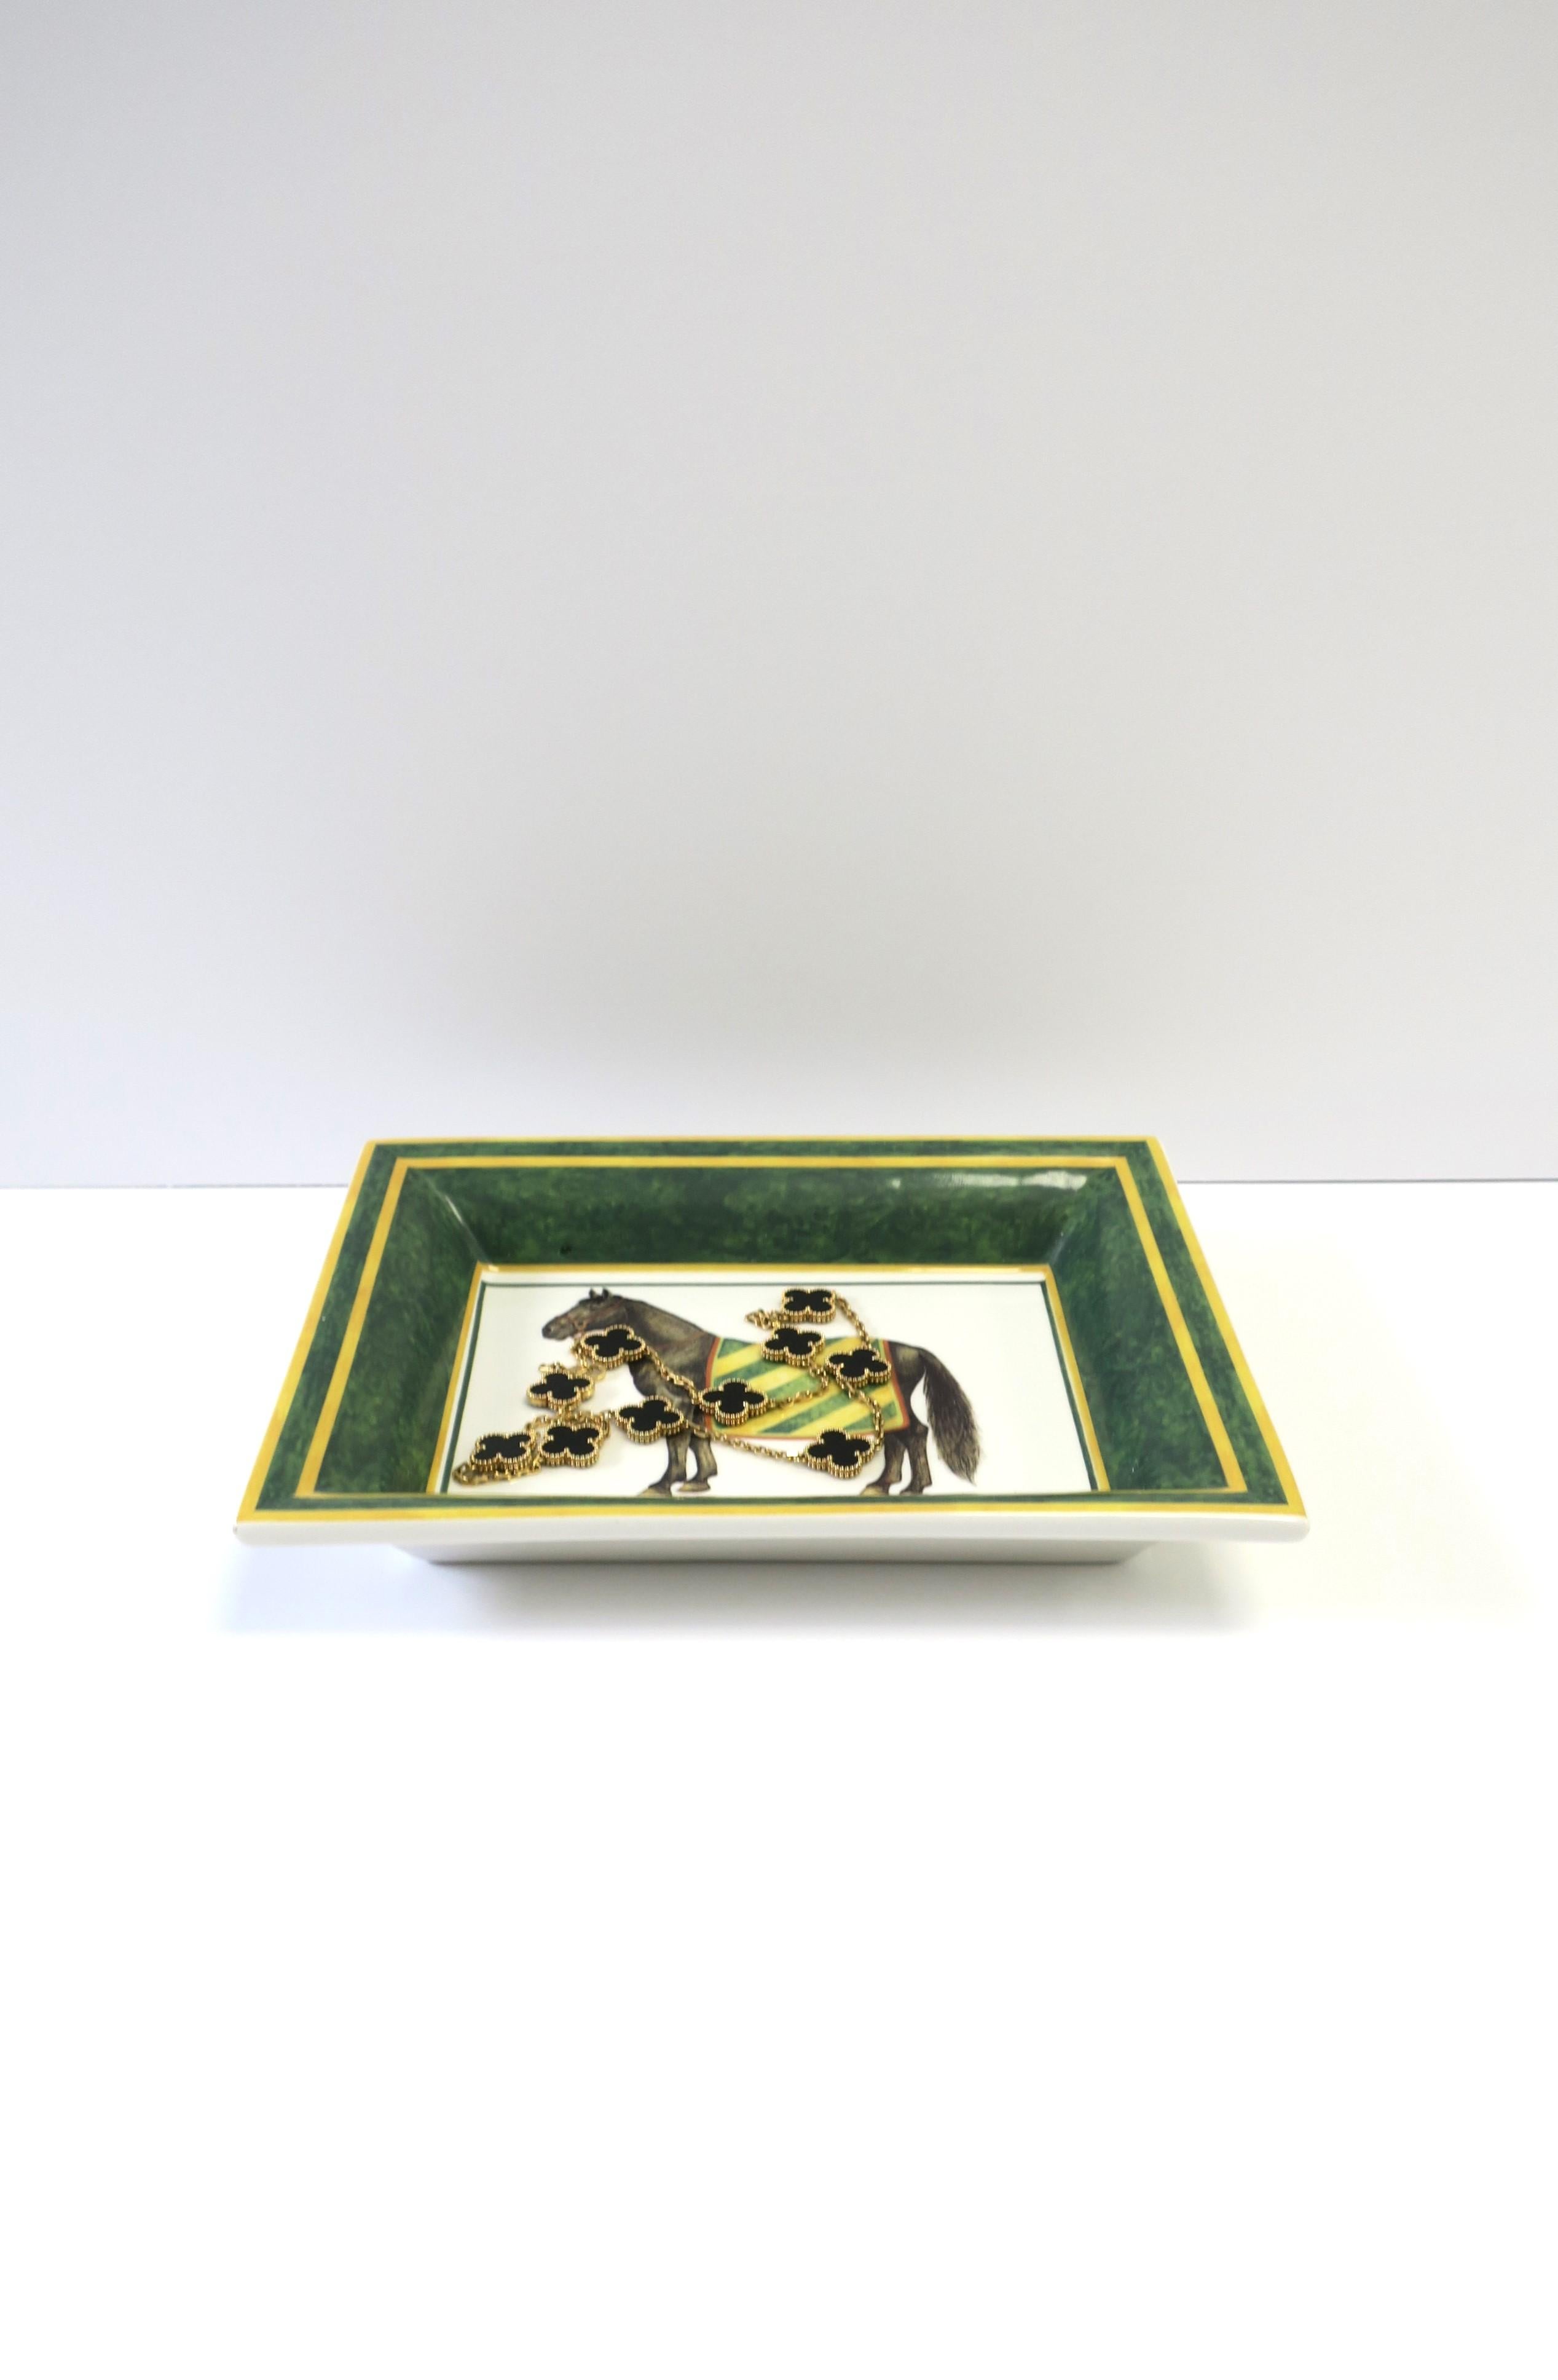 20th Century Italian Porcelain Jewelry Tray Dish Vide-Poche Catchall with Horse Design For Sale